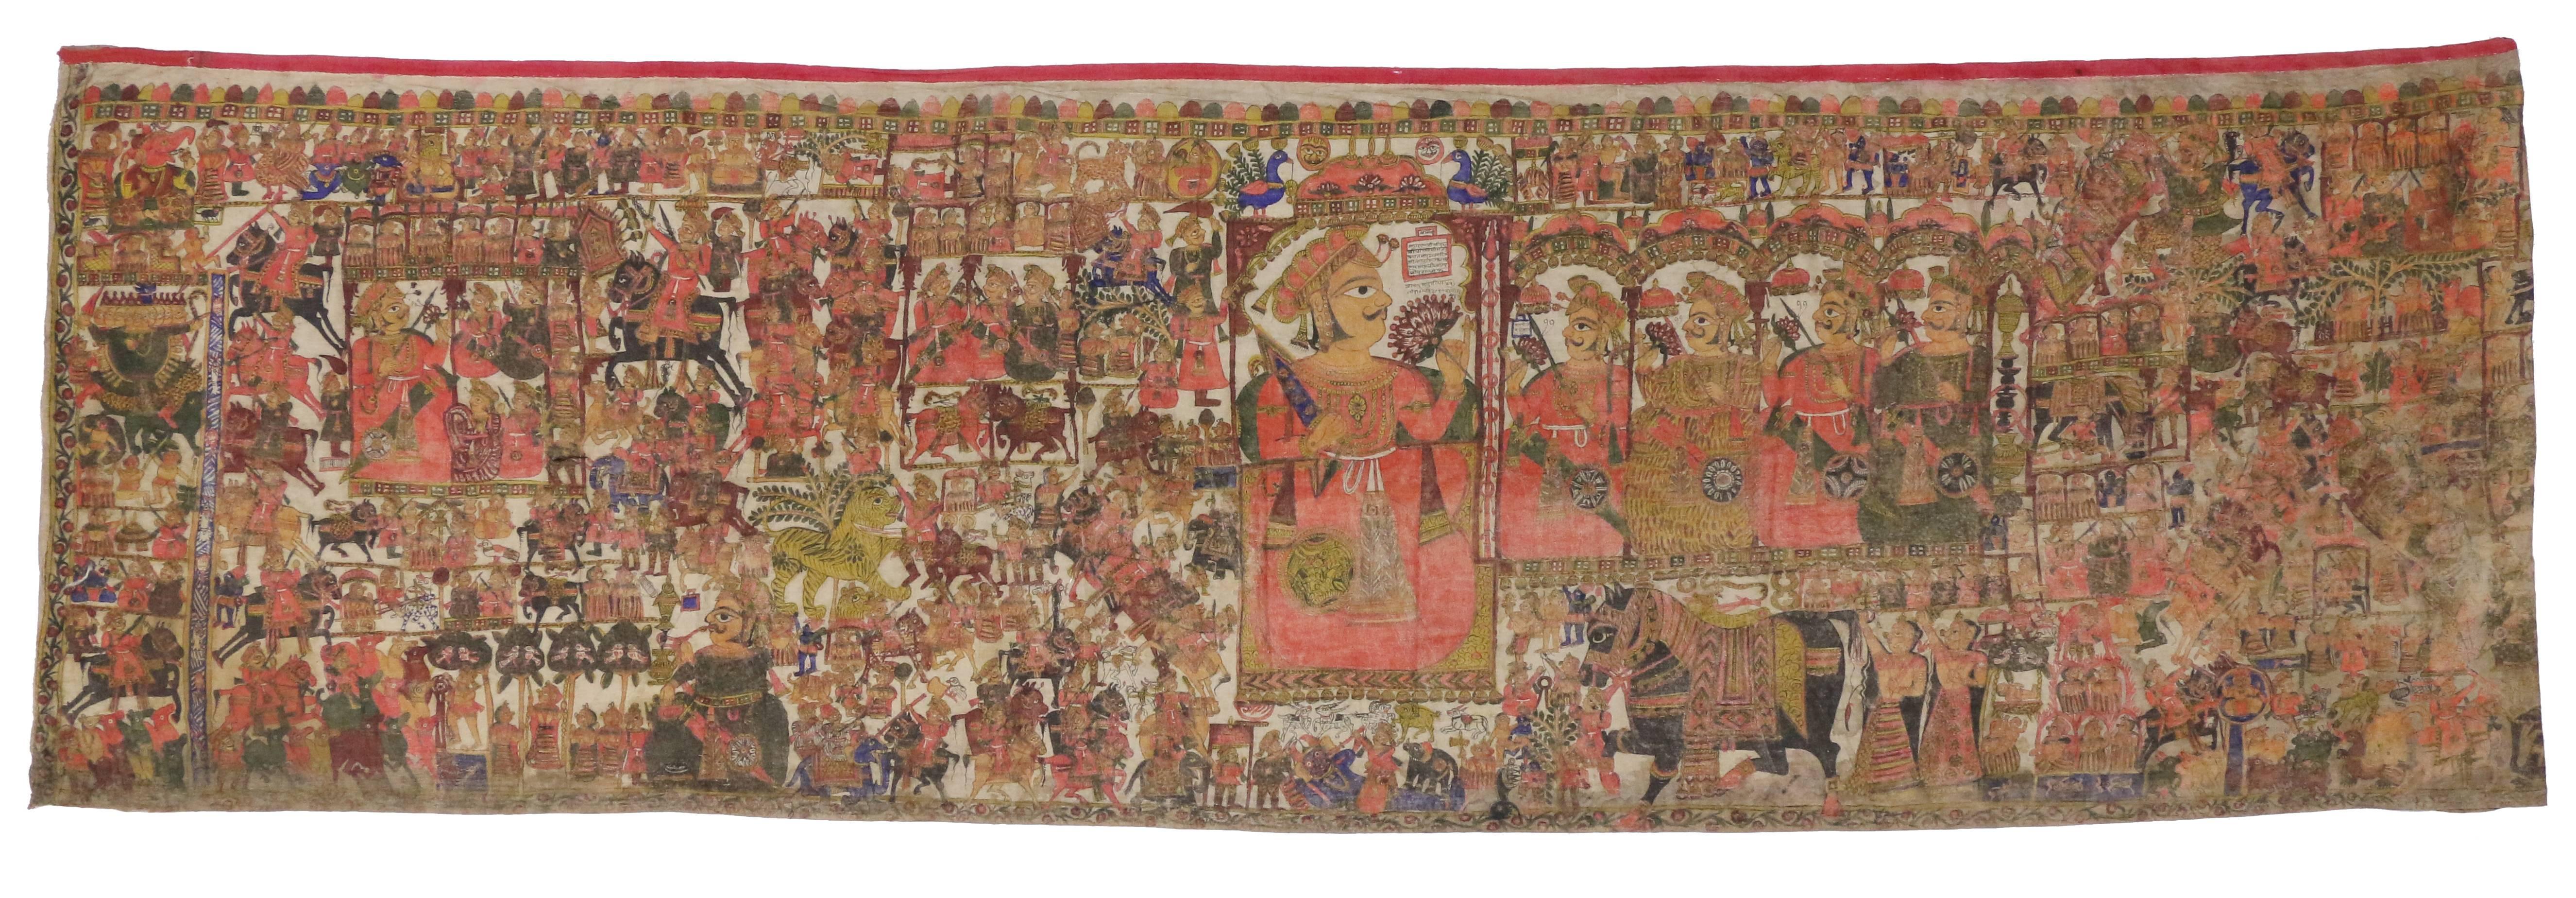 18th Century Antique Indian Medieval Tapestry after the Battle of ...